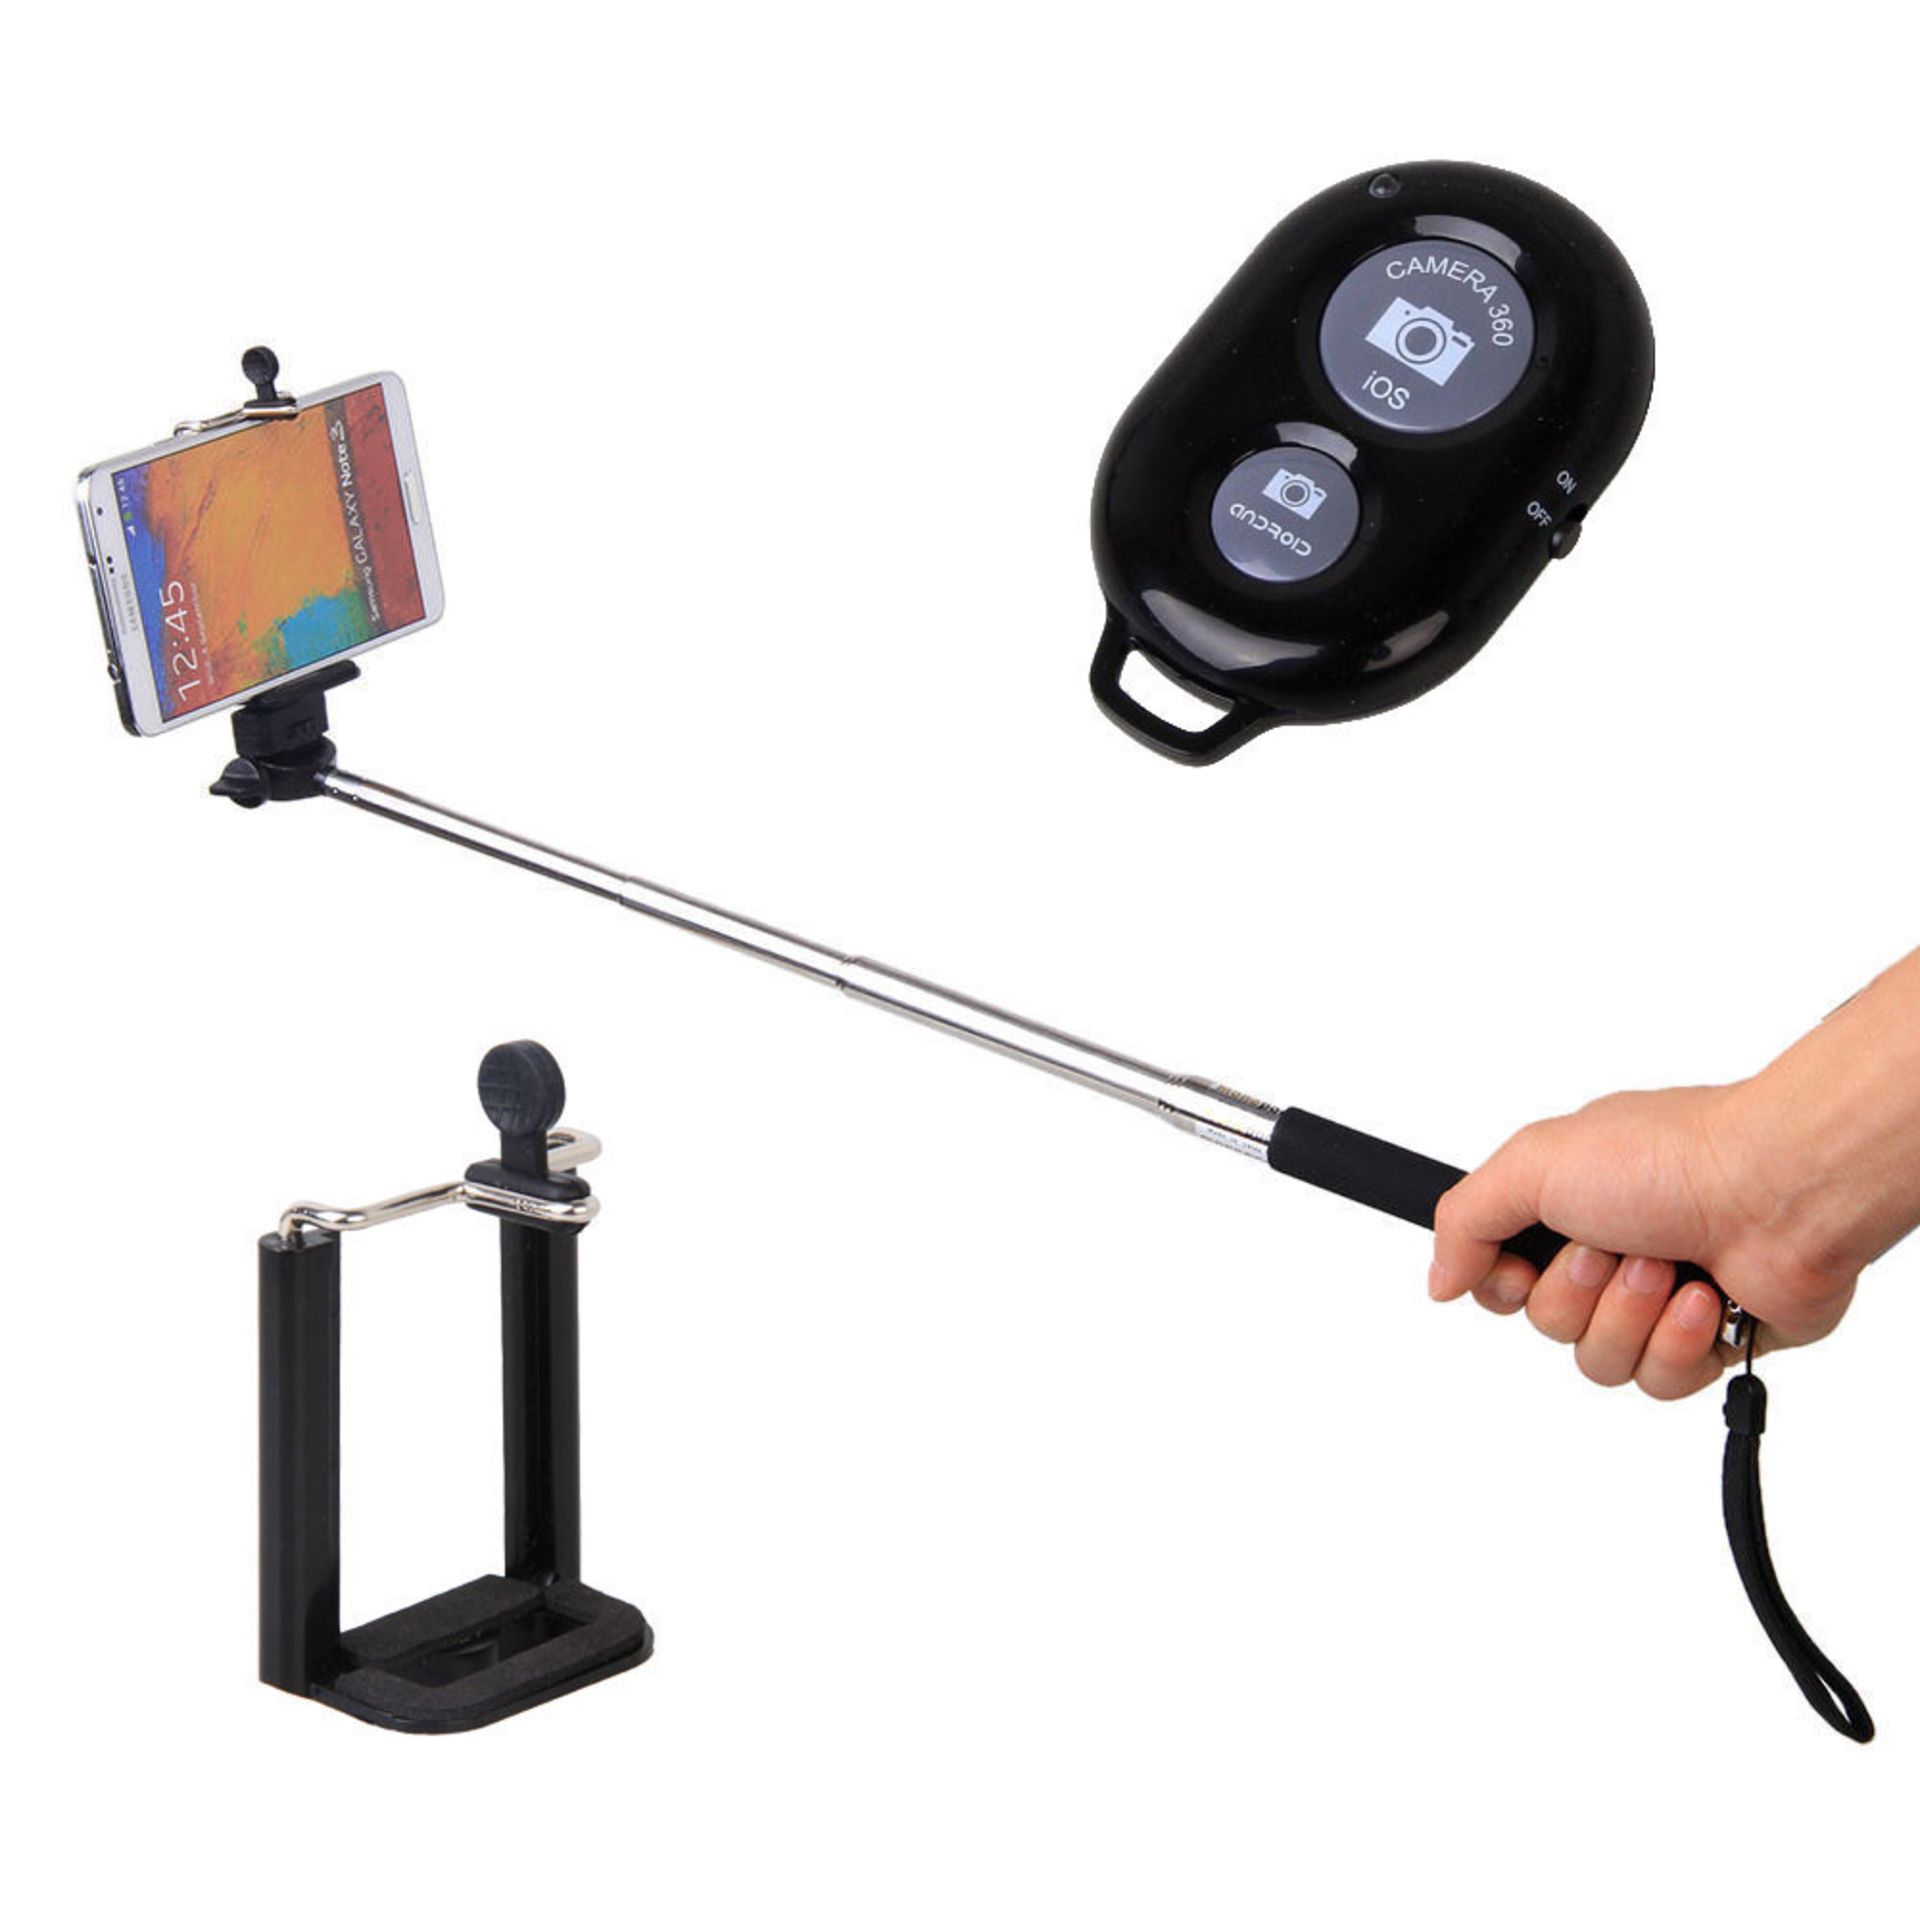 V *TRADE QTY* Brand New Selfie Stick with Bluetooth Remote Control - RRP £19.09 X 4 YOUR BID PRICE